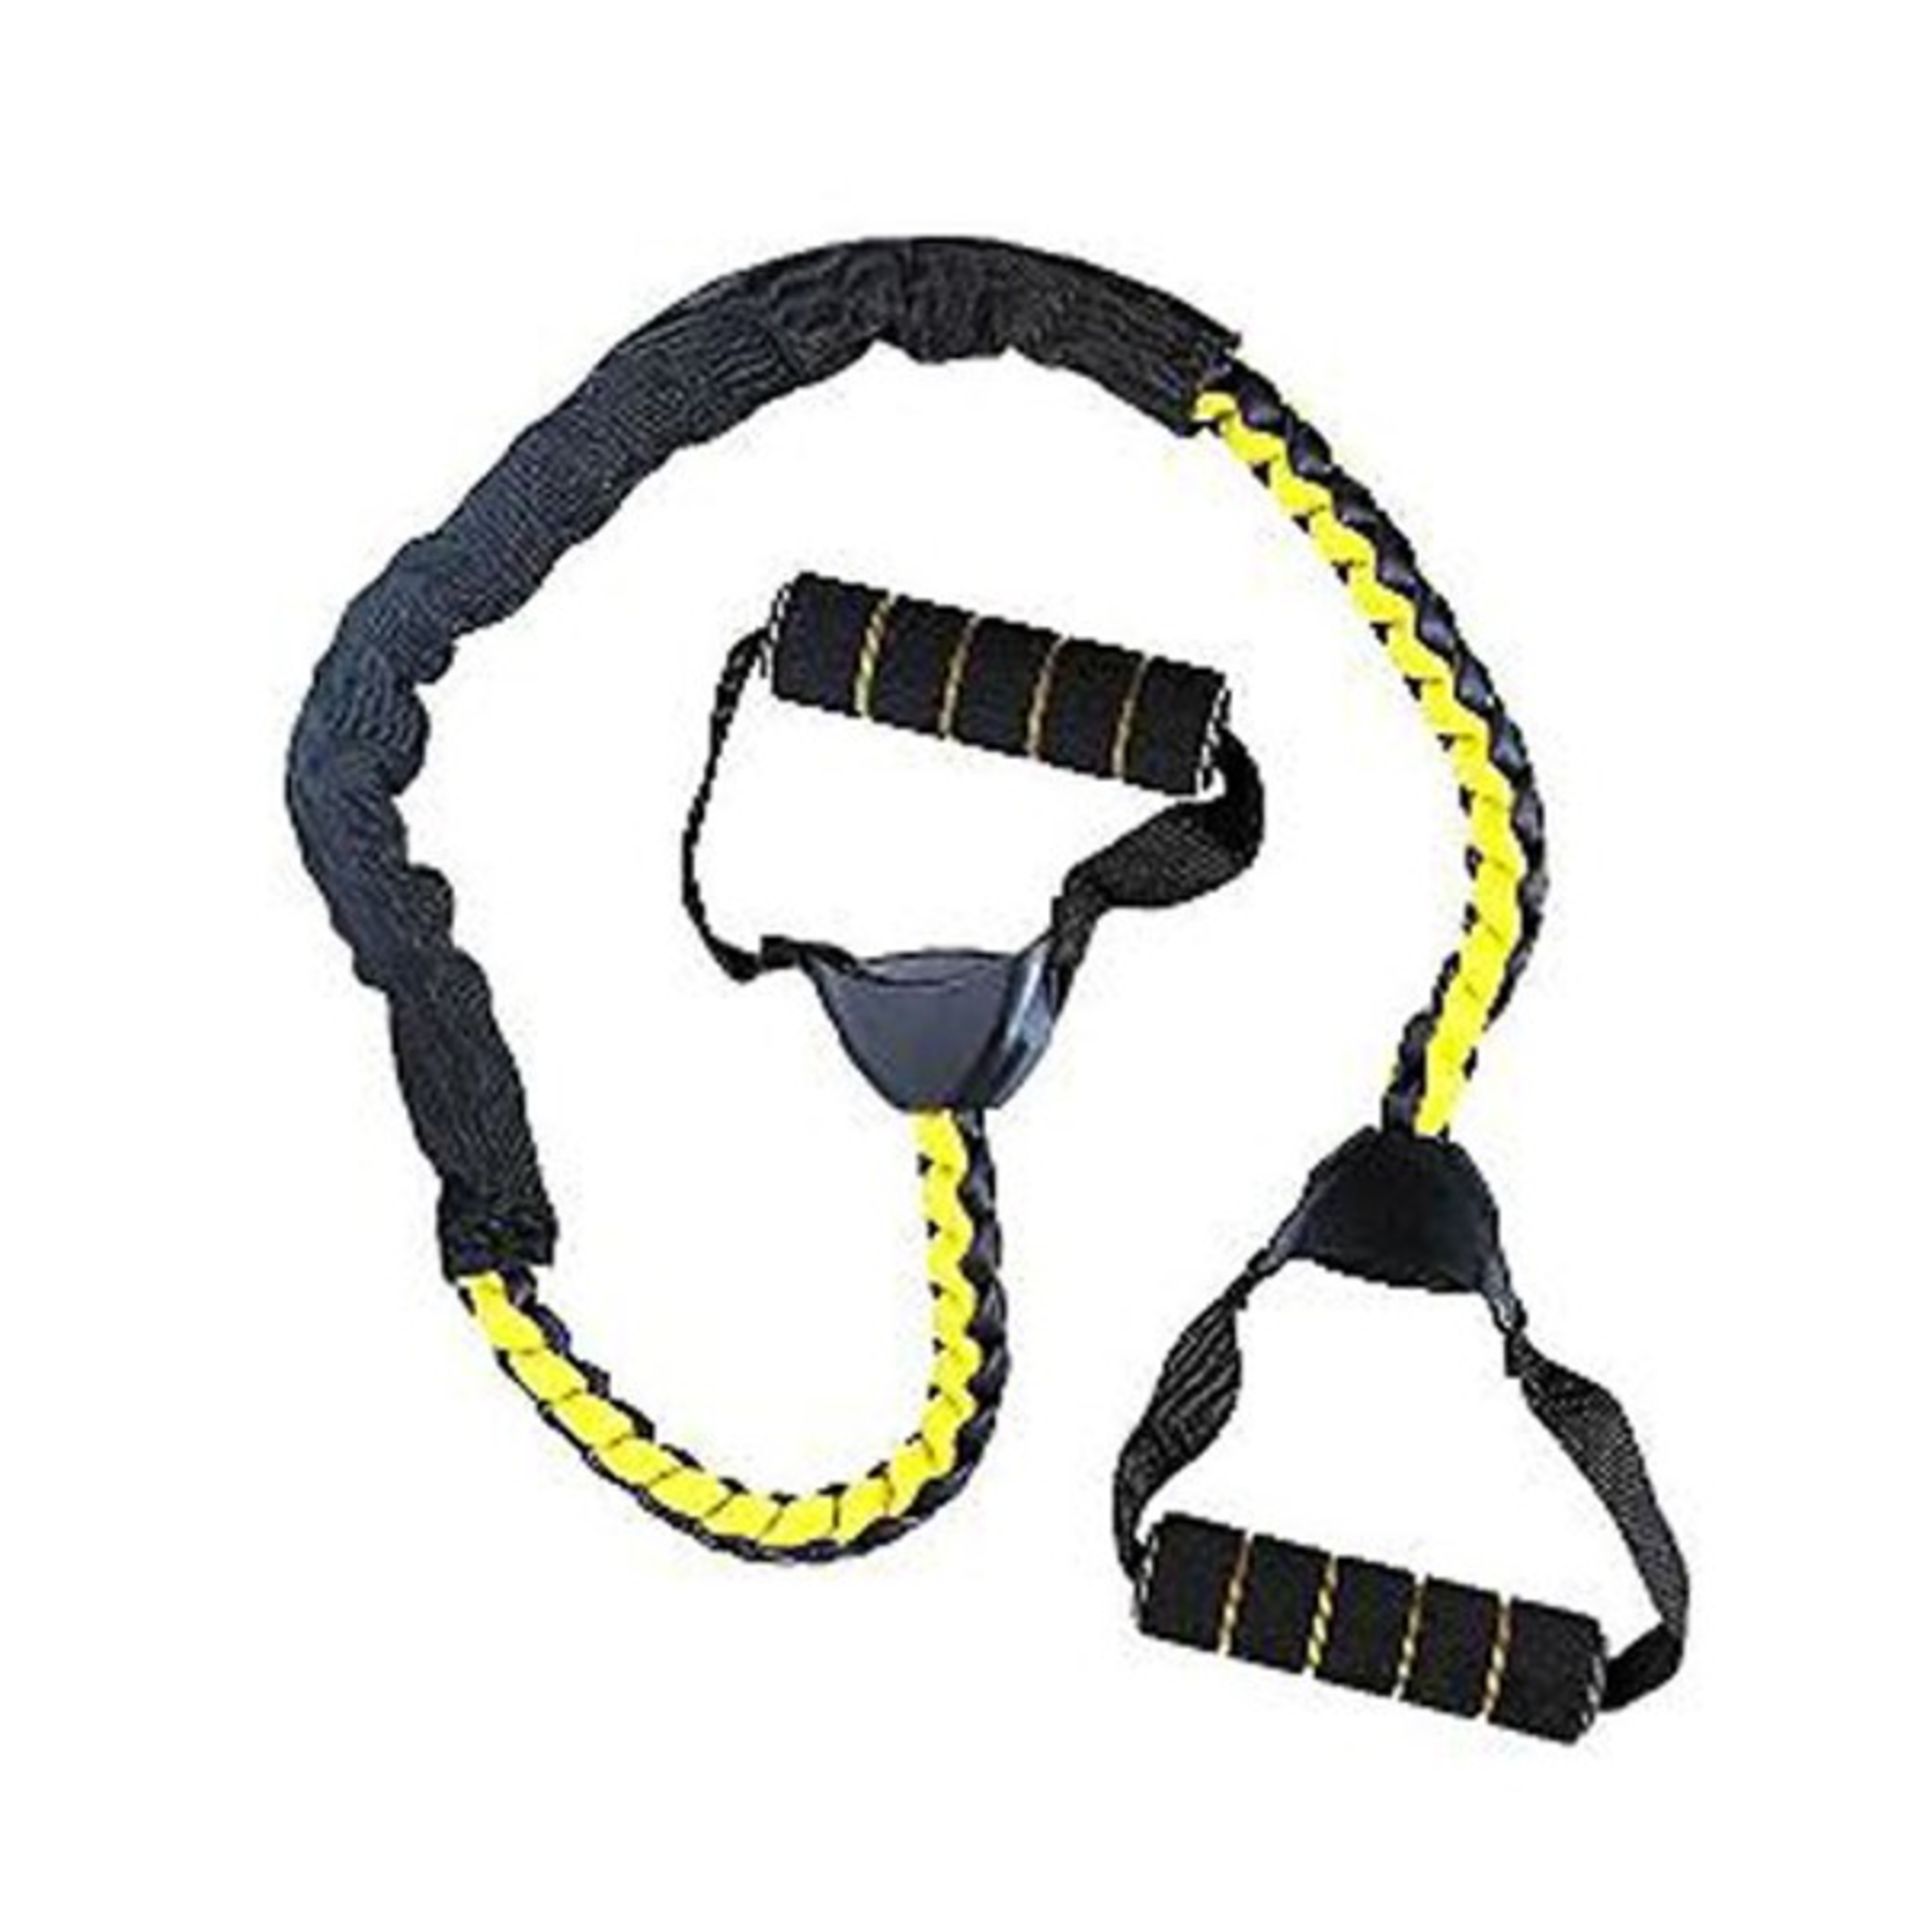 Clubfit - Braided Resistance Band RRP 24.99